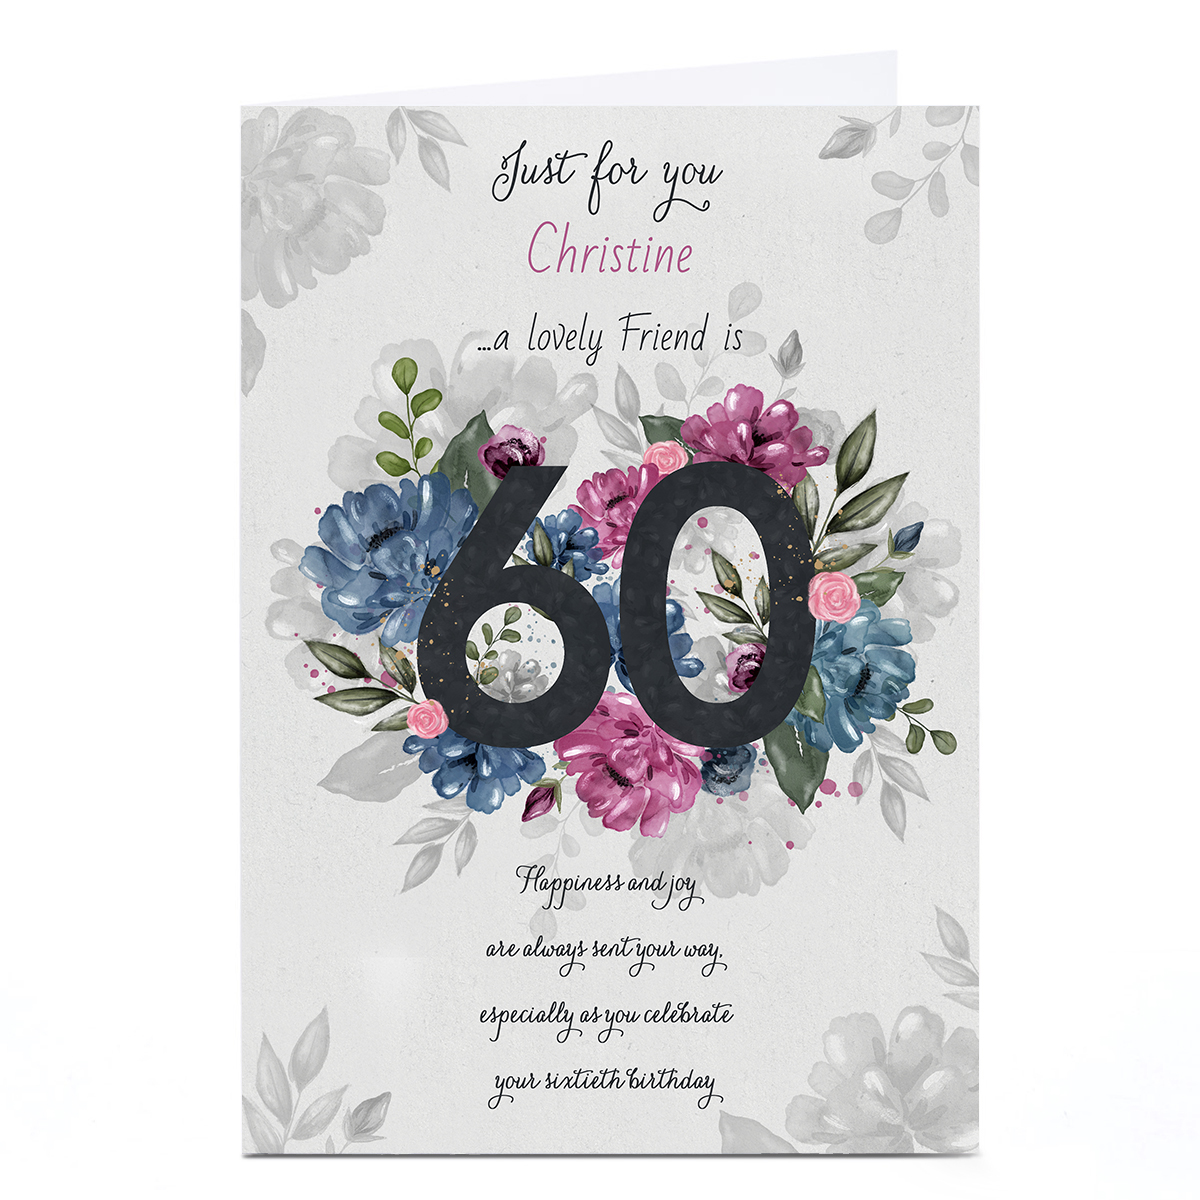 Buy Personalised 60th Birthday Card Lovely Friend Floral For Gbp 1 79 Card Factory Uk